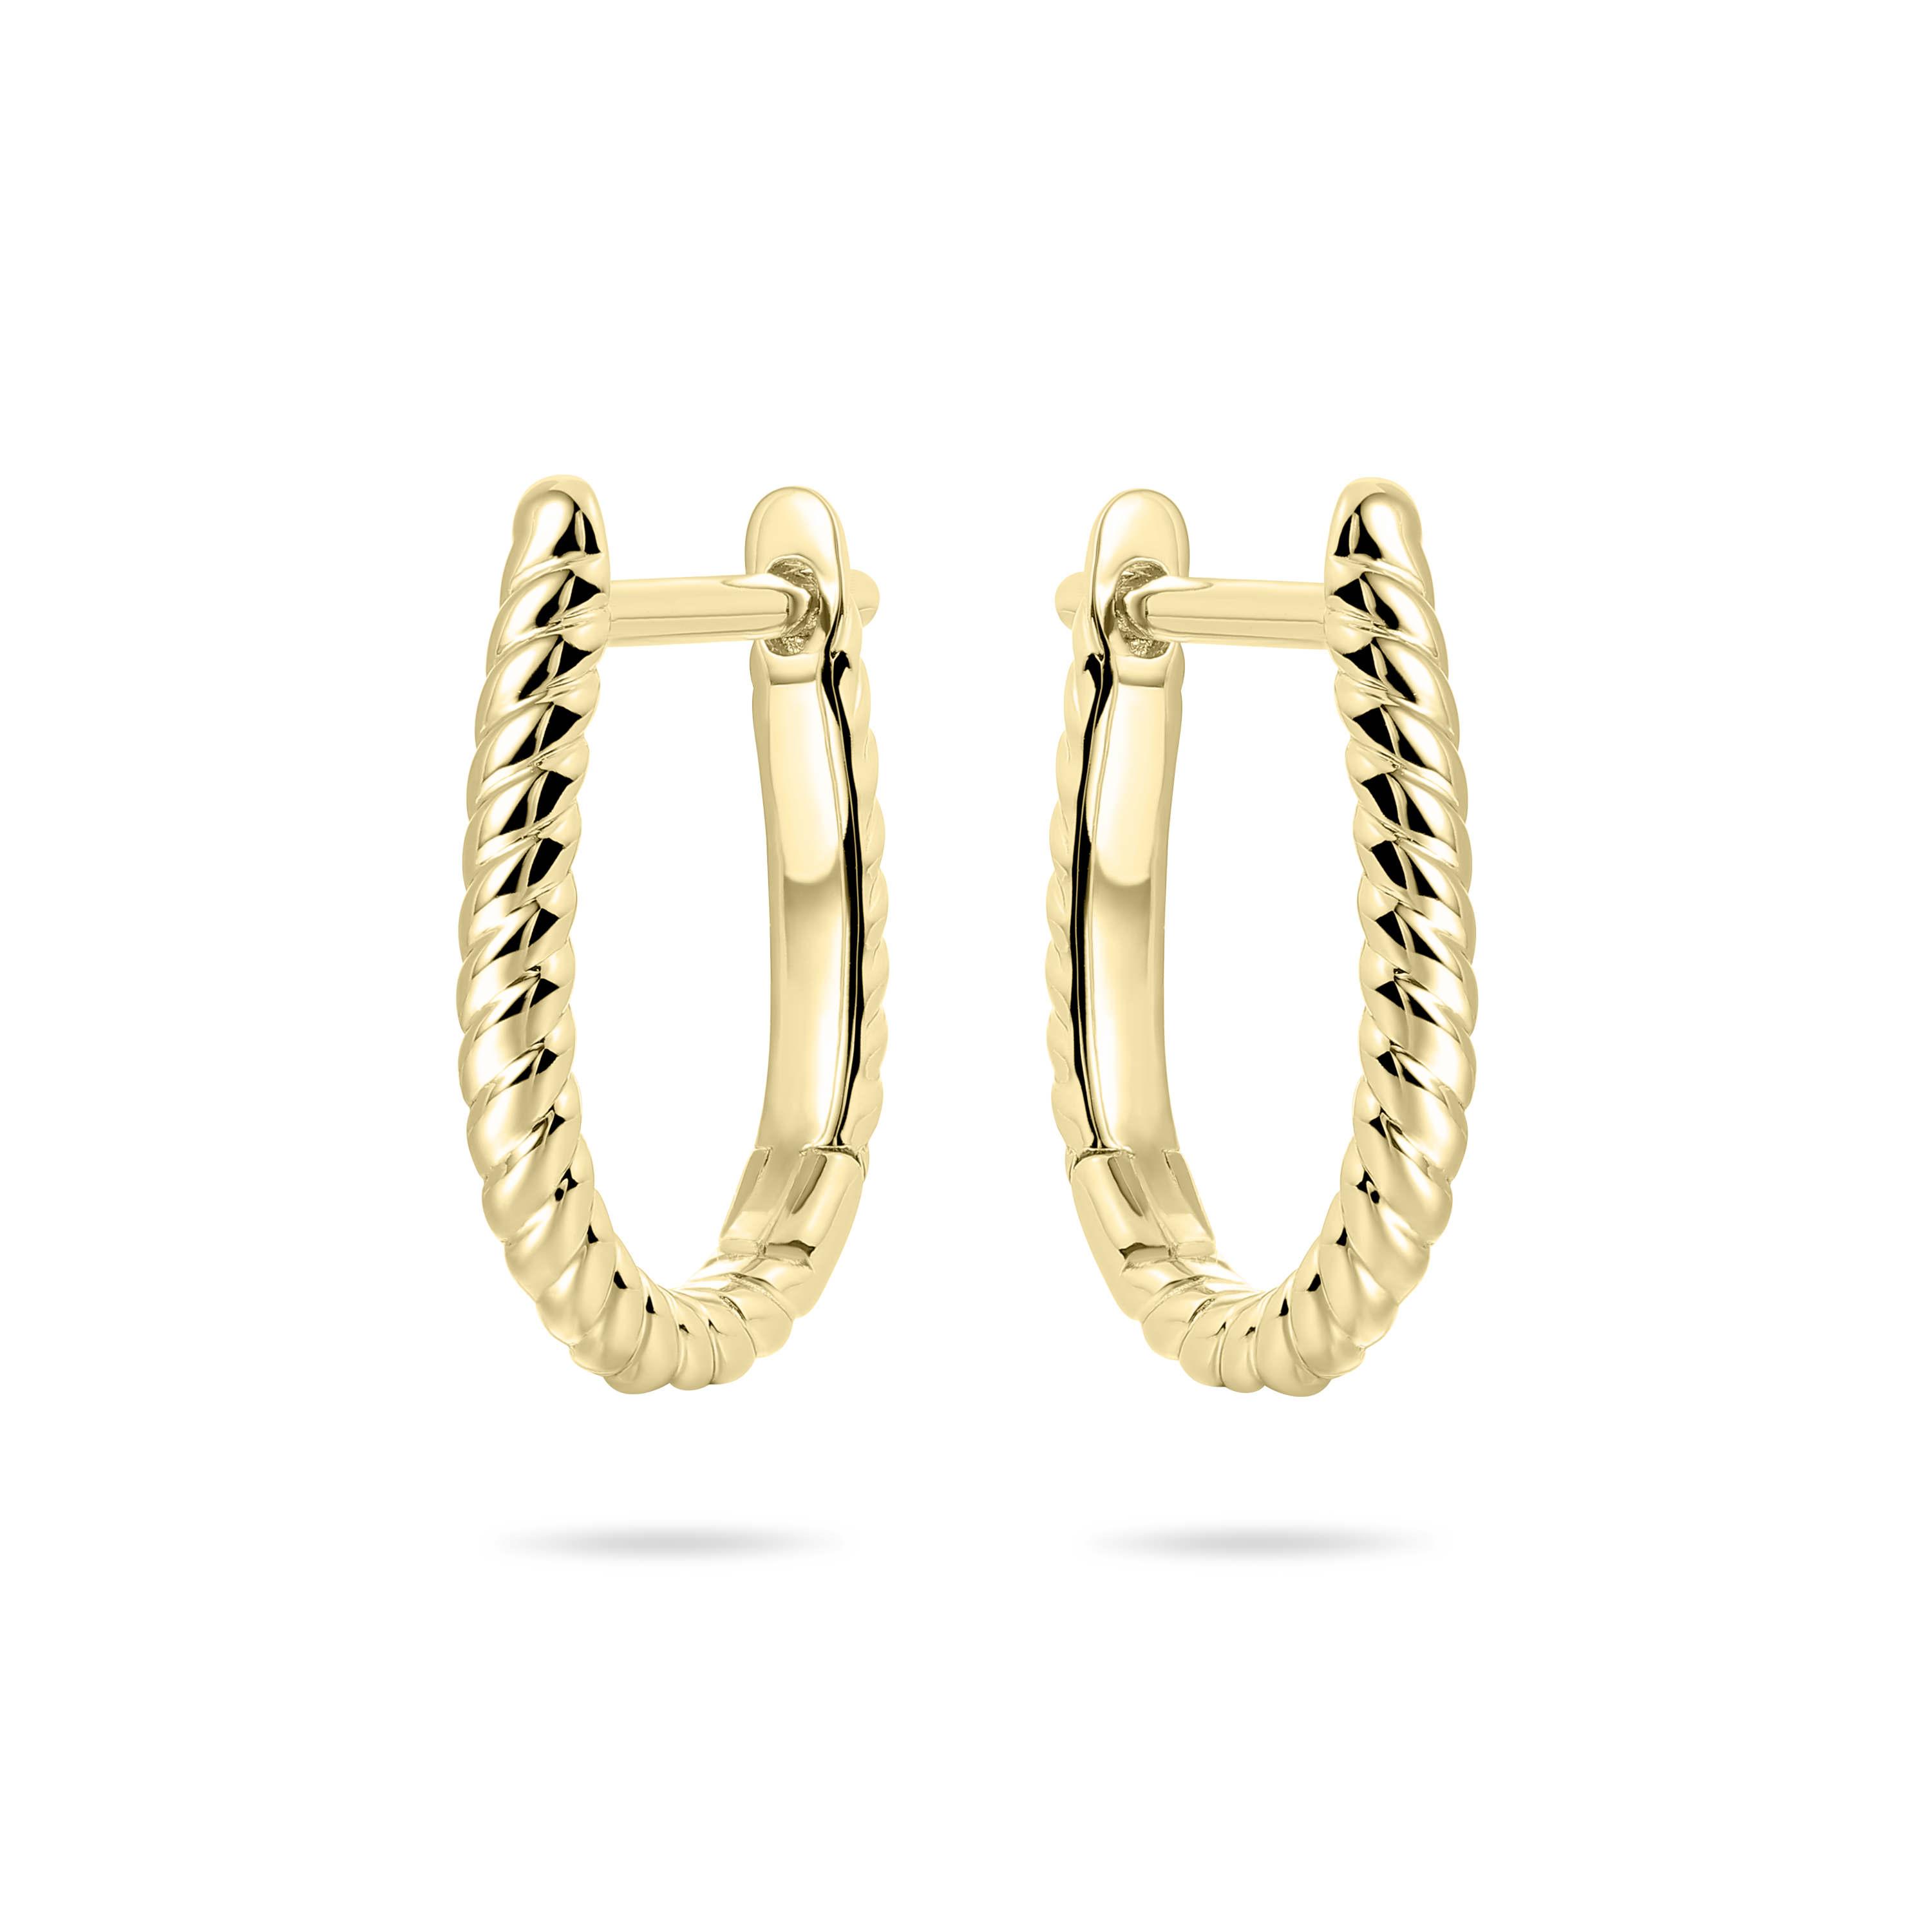 Gisser Jewels Silver Gold Plated Rope Oval Hoop Earrings